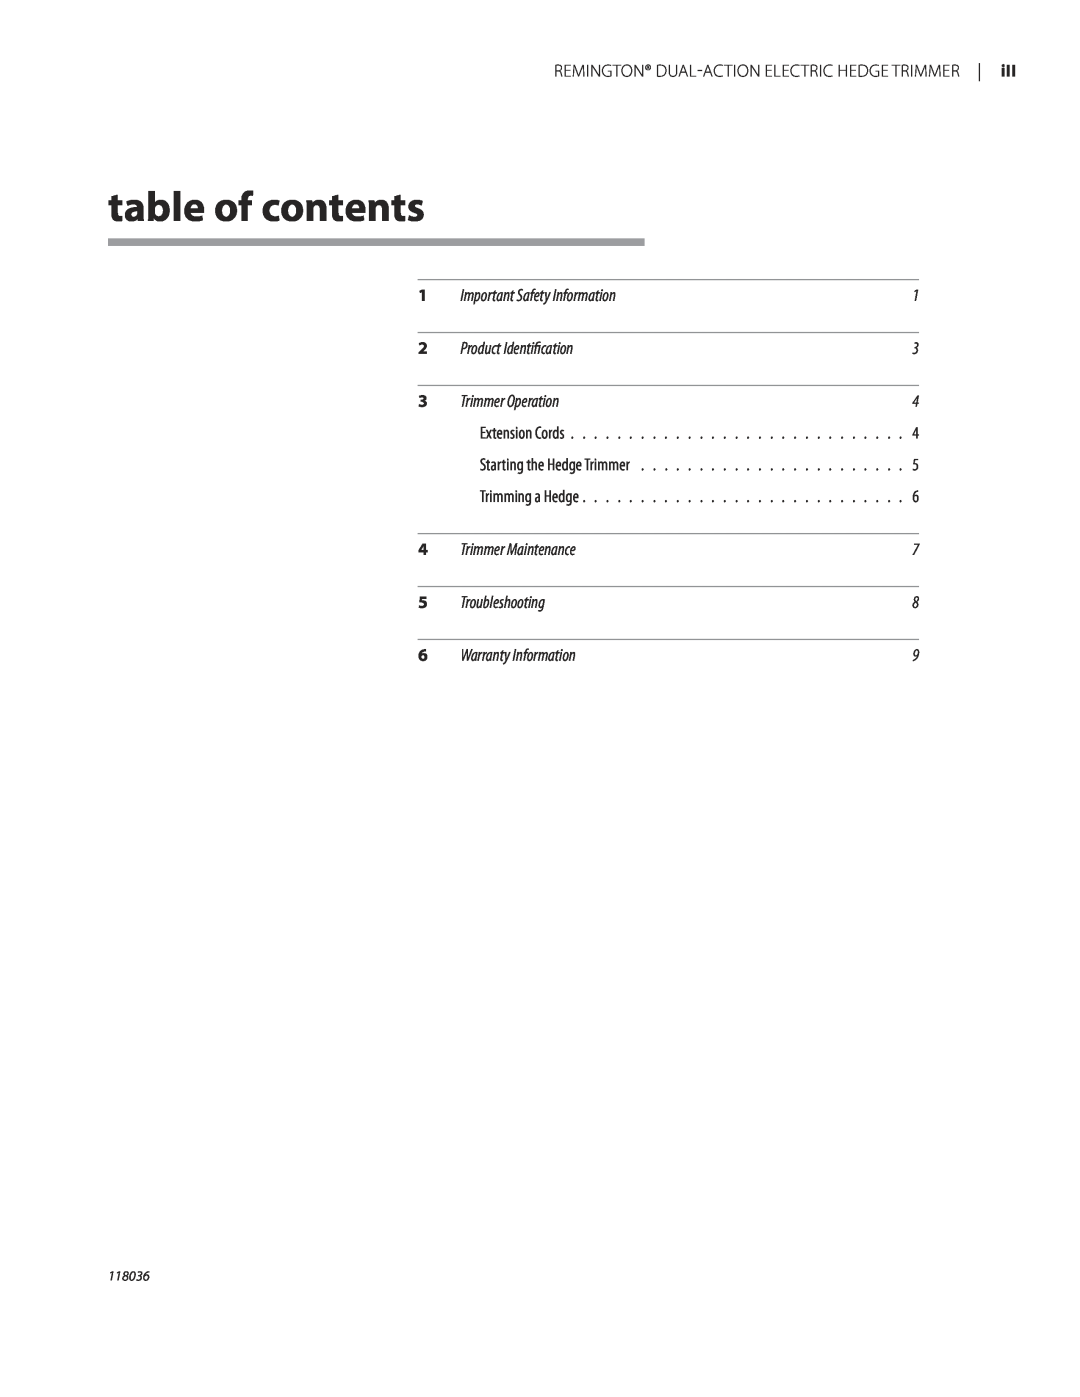 Remington HT3218A, HT4022A owner manual table of contents, Remington Dual-Actionelectric Hedge Trimmer 